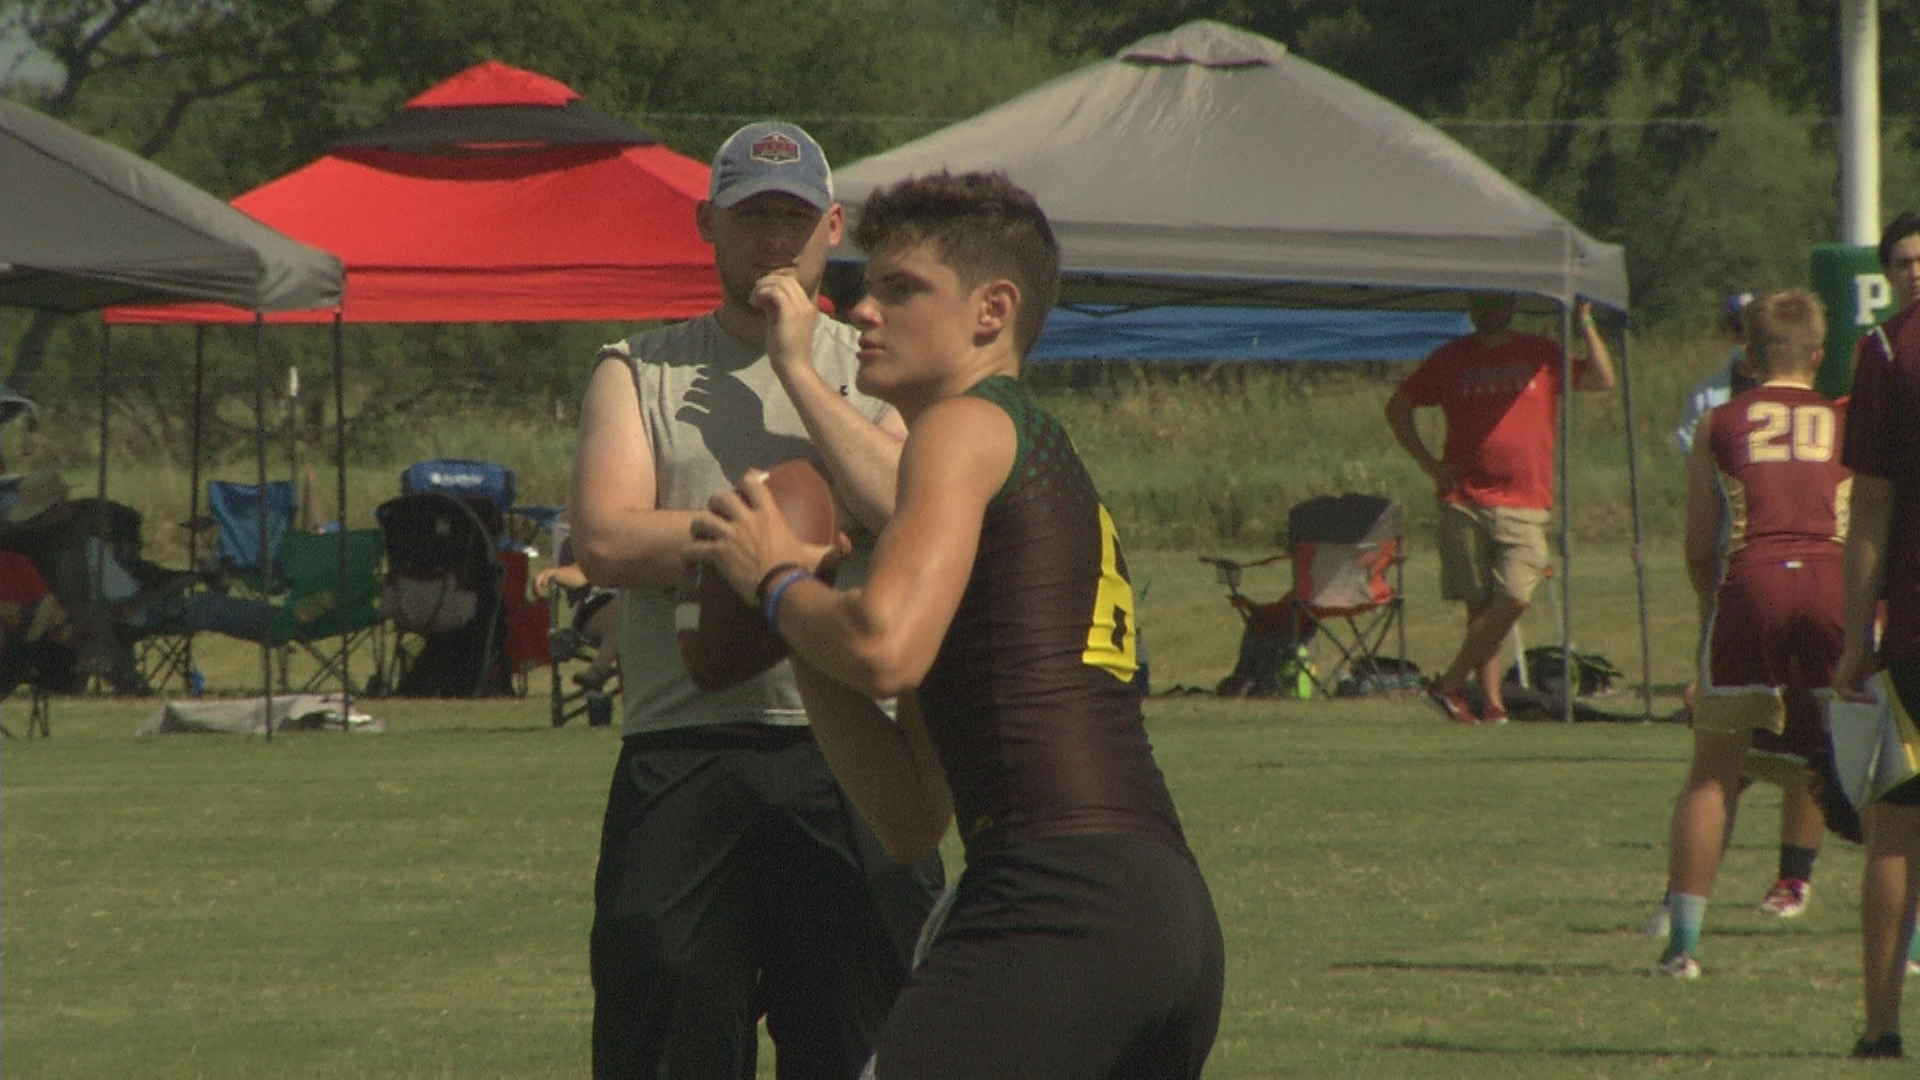 The first football event in Texas this summer was at Waco's Parkview Christian Academy on Saturday.